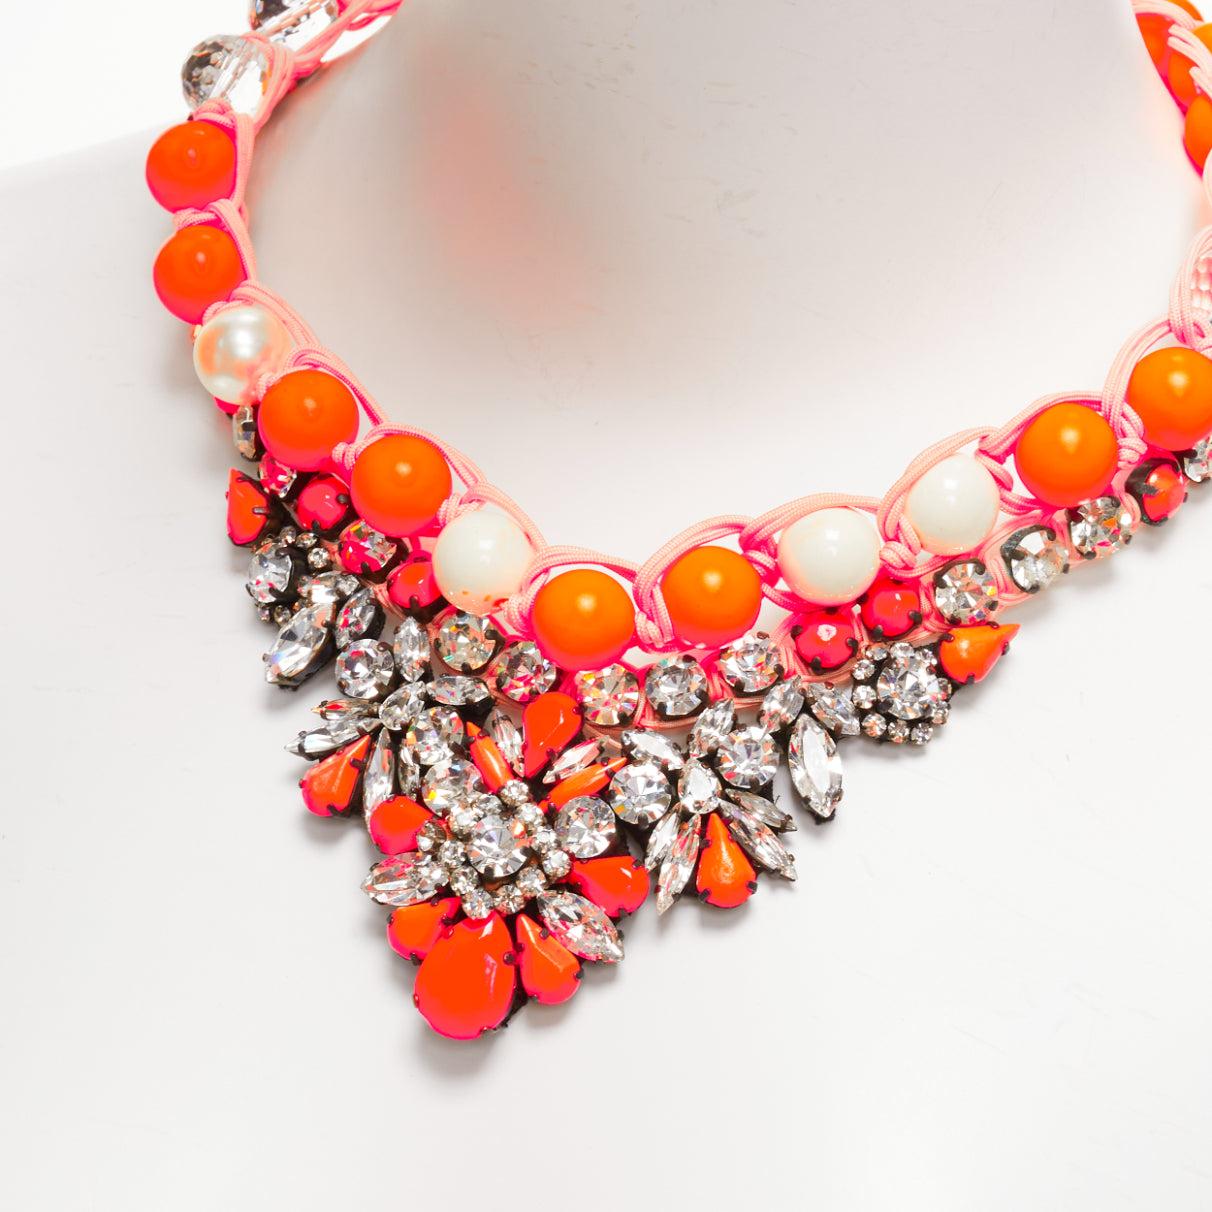 SHOUROUK neon orange clear crystal beads rope chain choker necklace For Sale 2